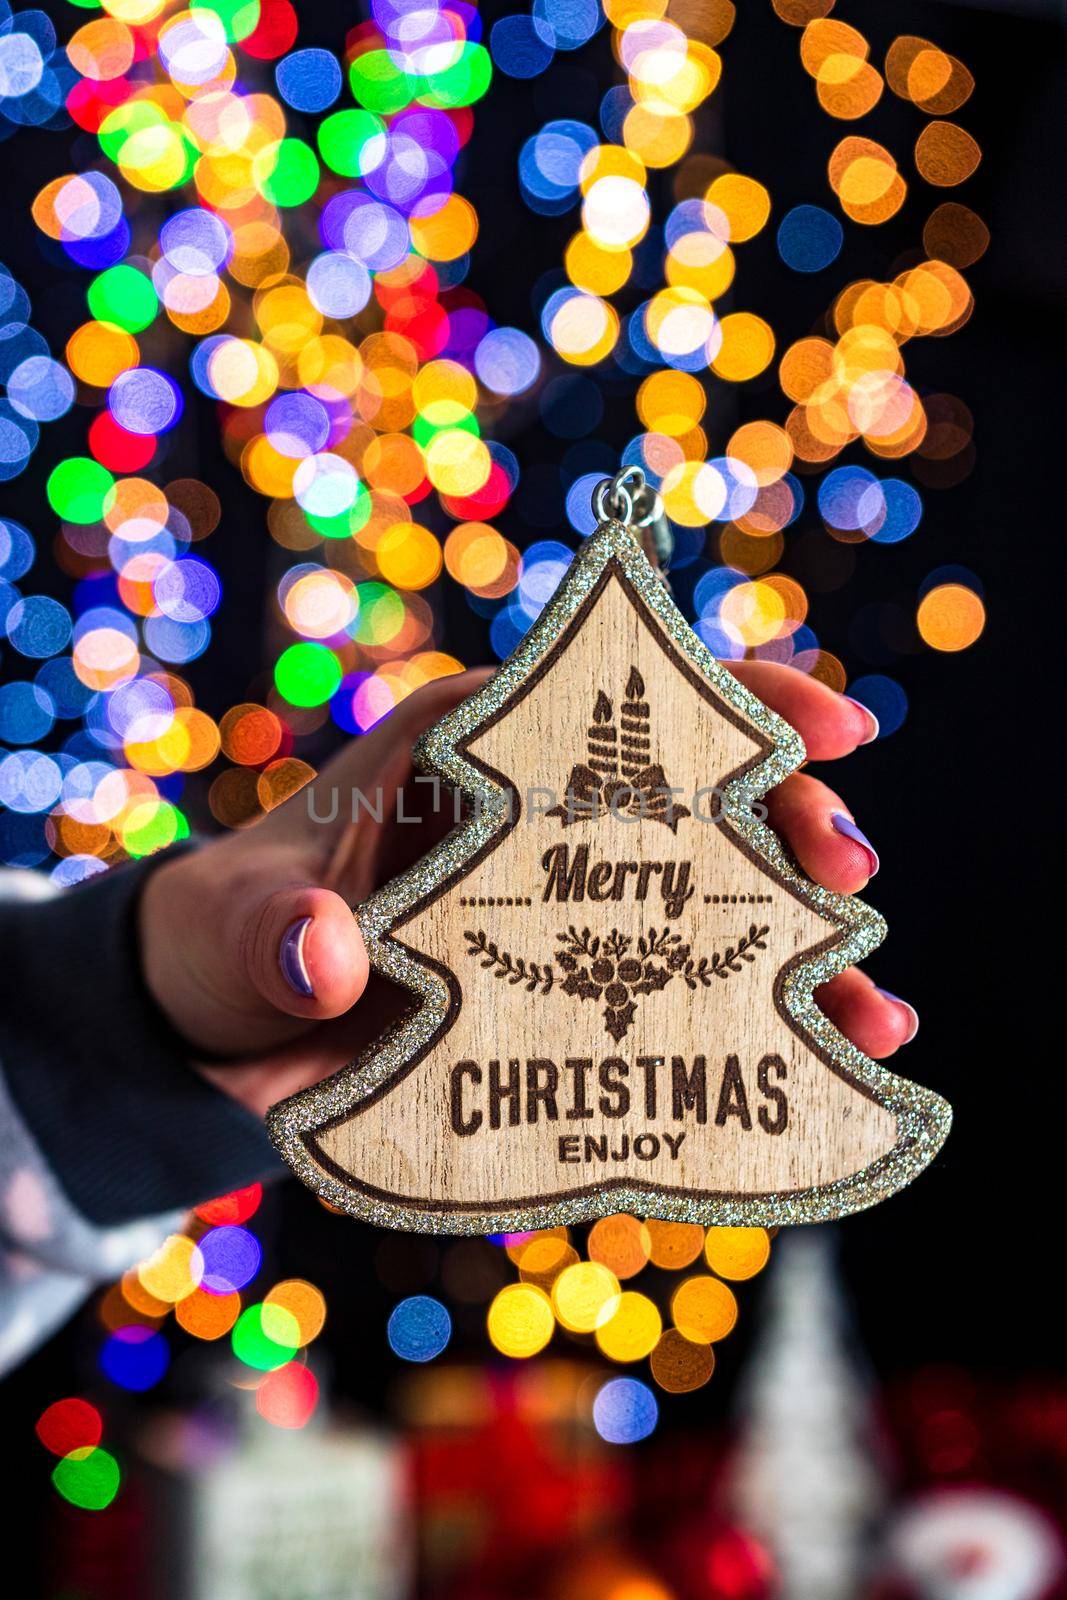 Holding Christmas decoration isolated on background with blurred lights. December season, Christmas composition.